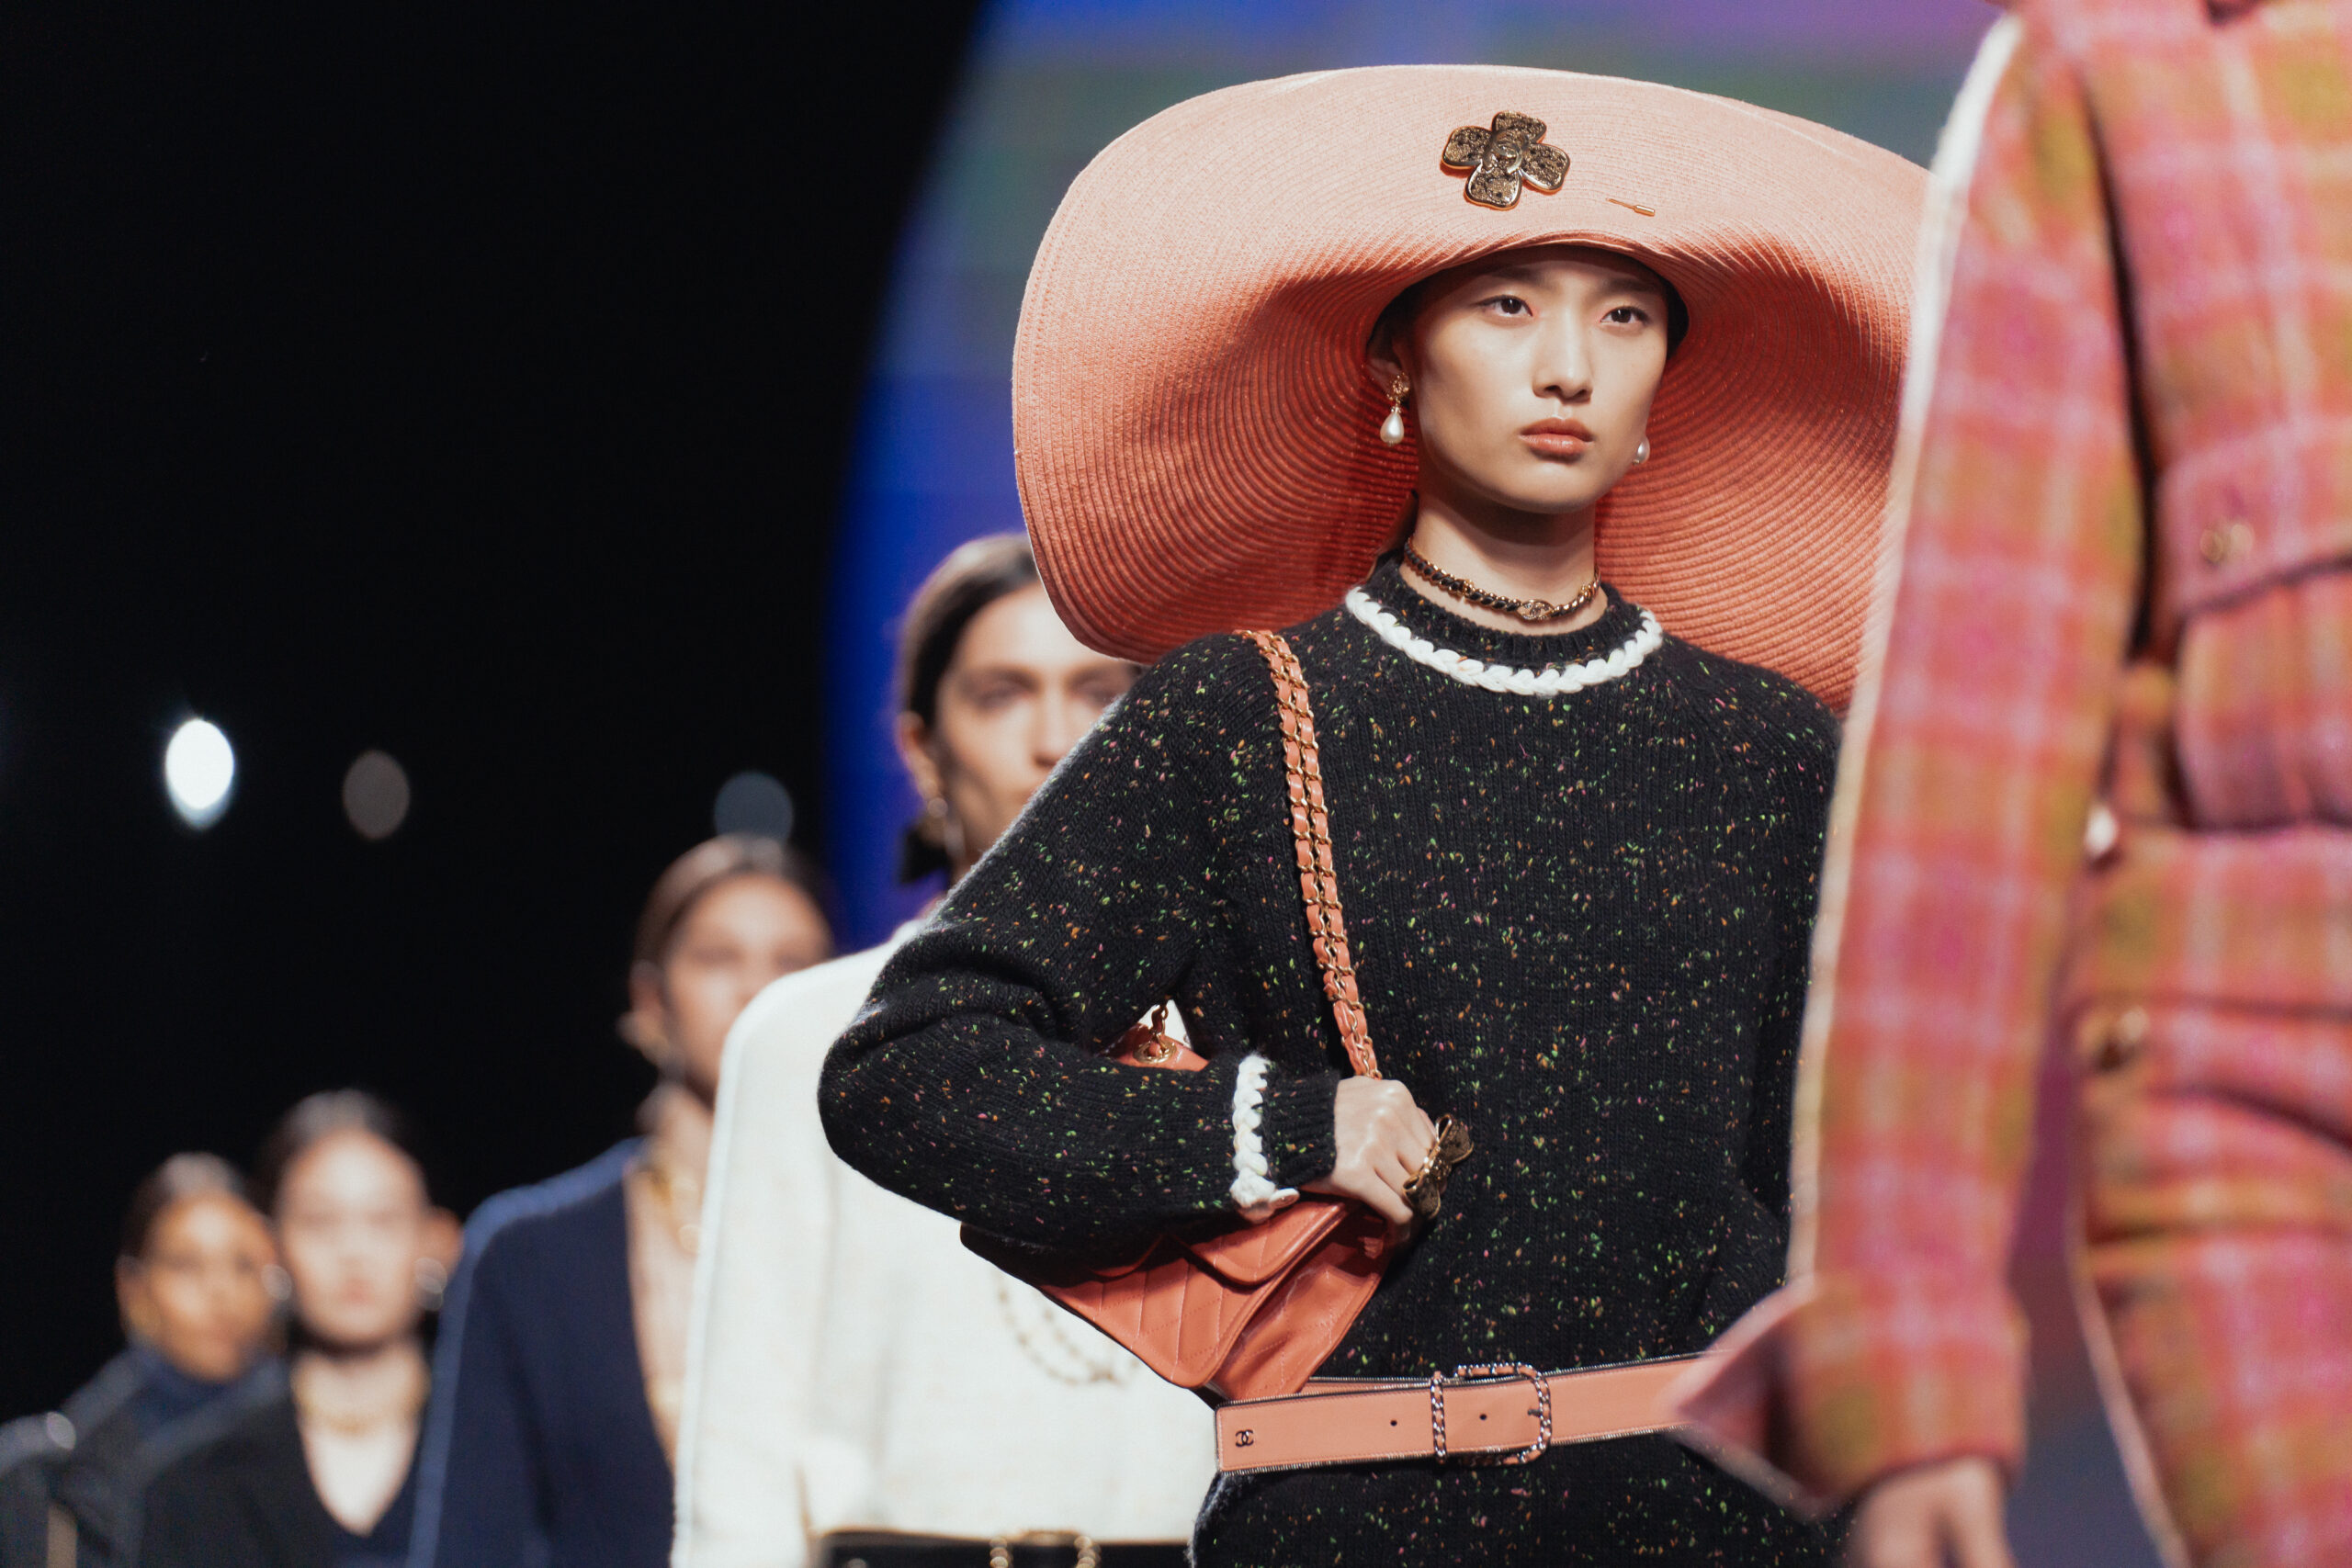 A model at the CHANEL Fall/Winter 2024/25 show is featured wearing a black speckled tweed dress with white collar and cuffs, accessorized with a large peach-colored hat, pearl necklace, and a matching crossbody bag.